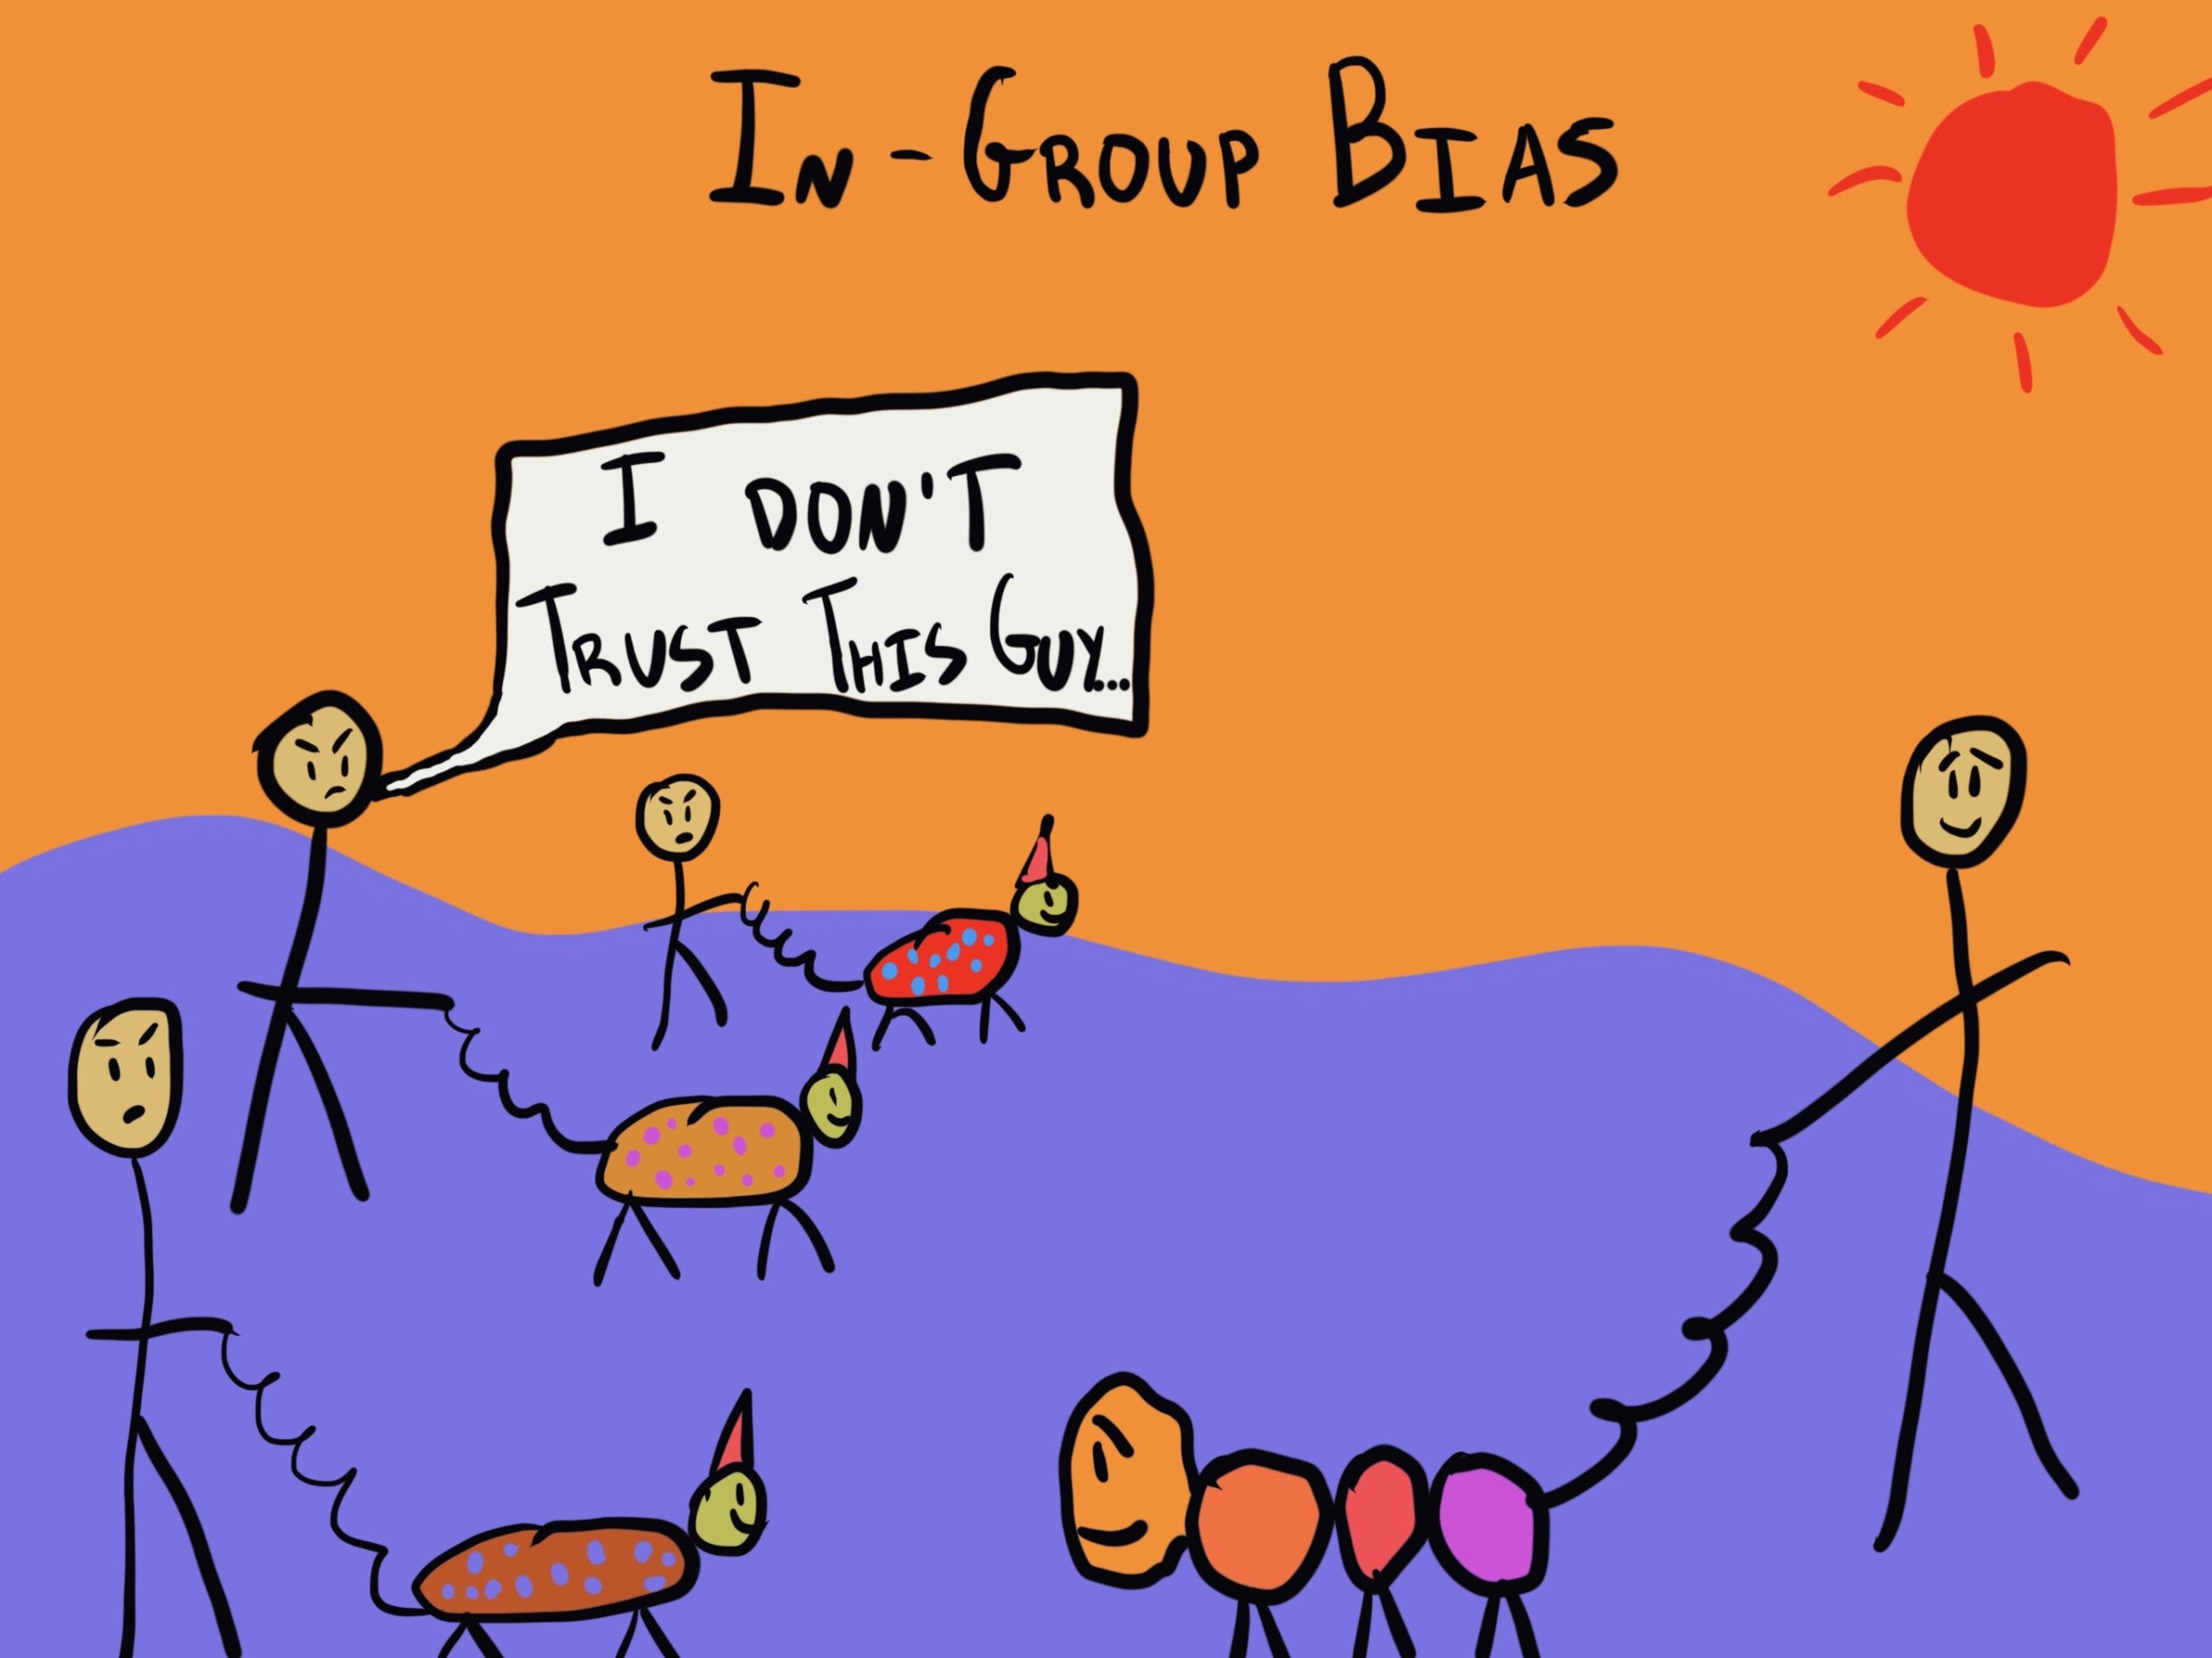 In-Group Bias illustrations